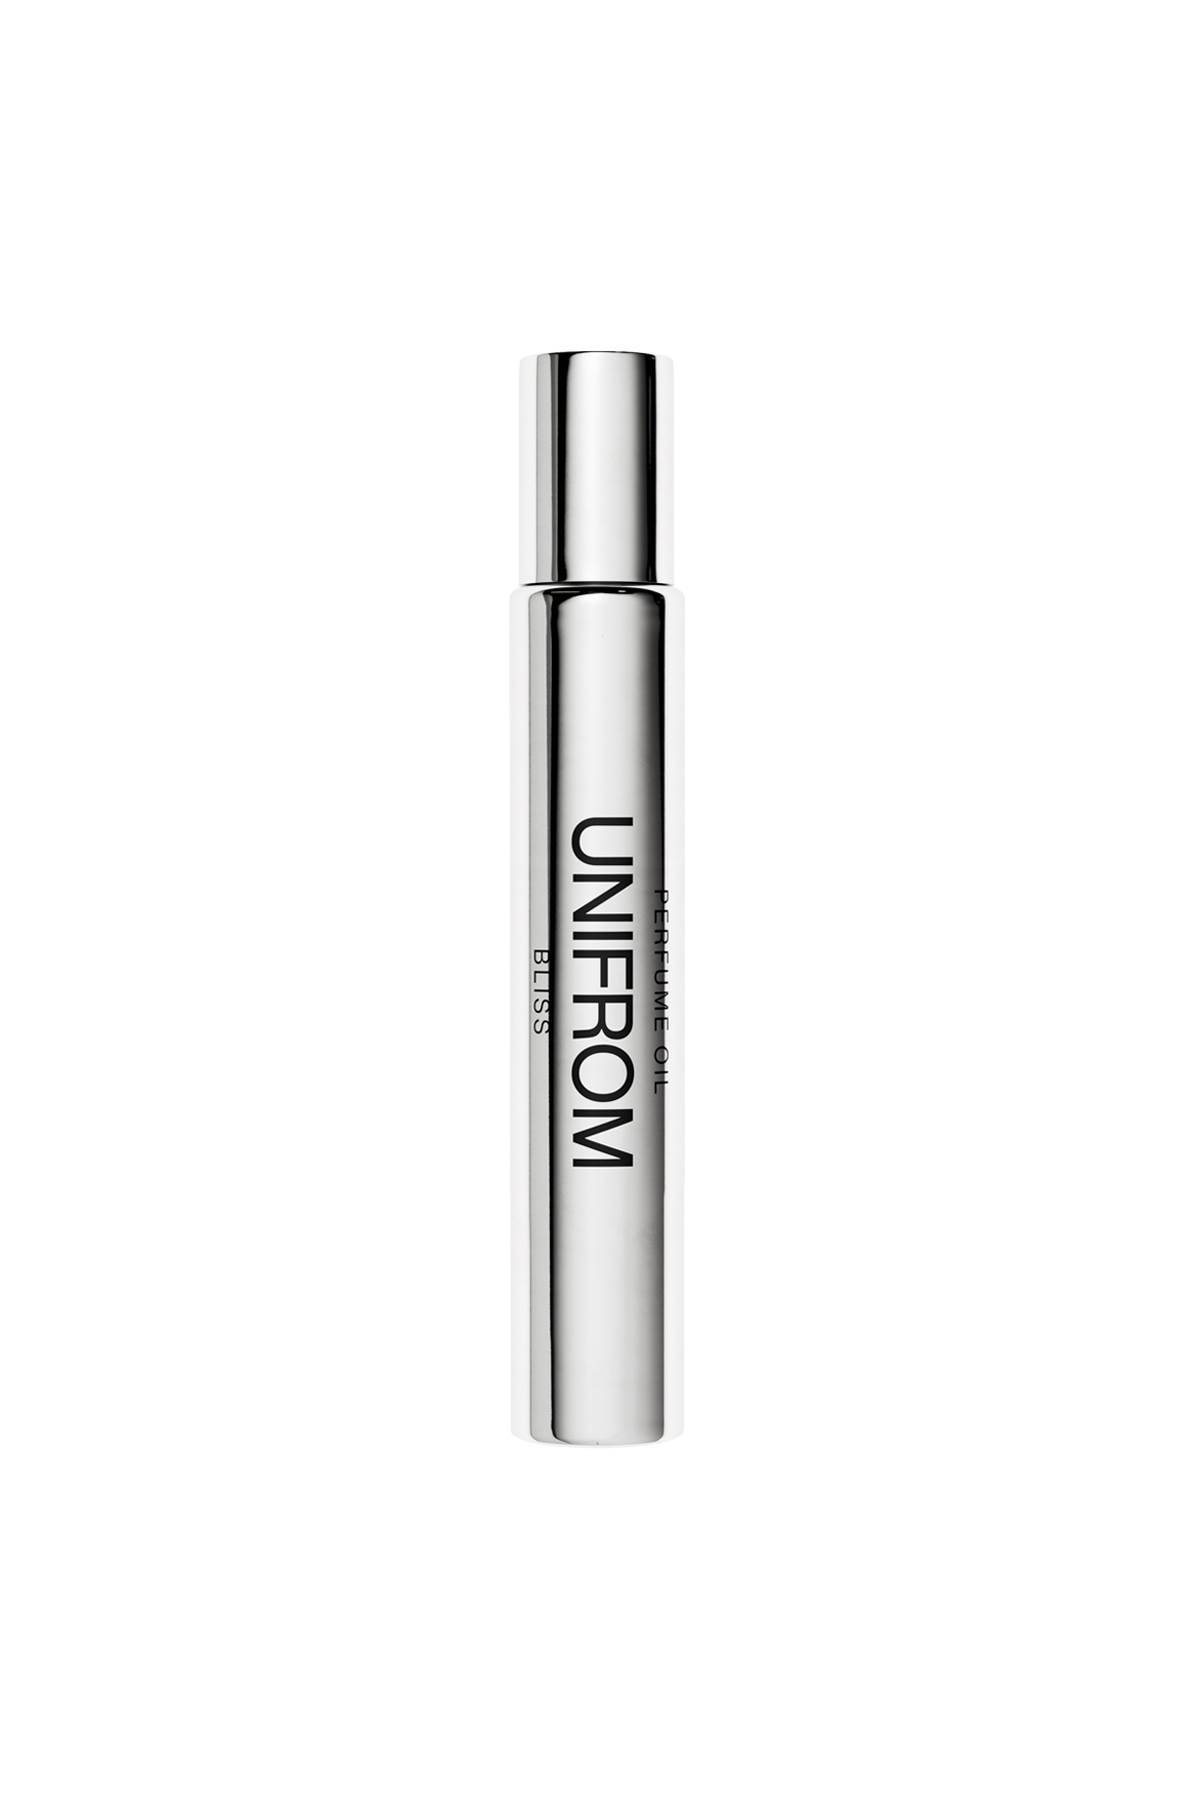 UNIFROM UNIFROM perfume oil bliss - 10ml